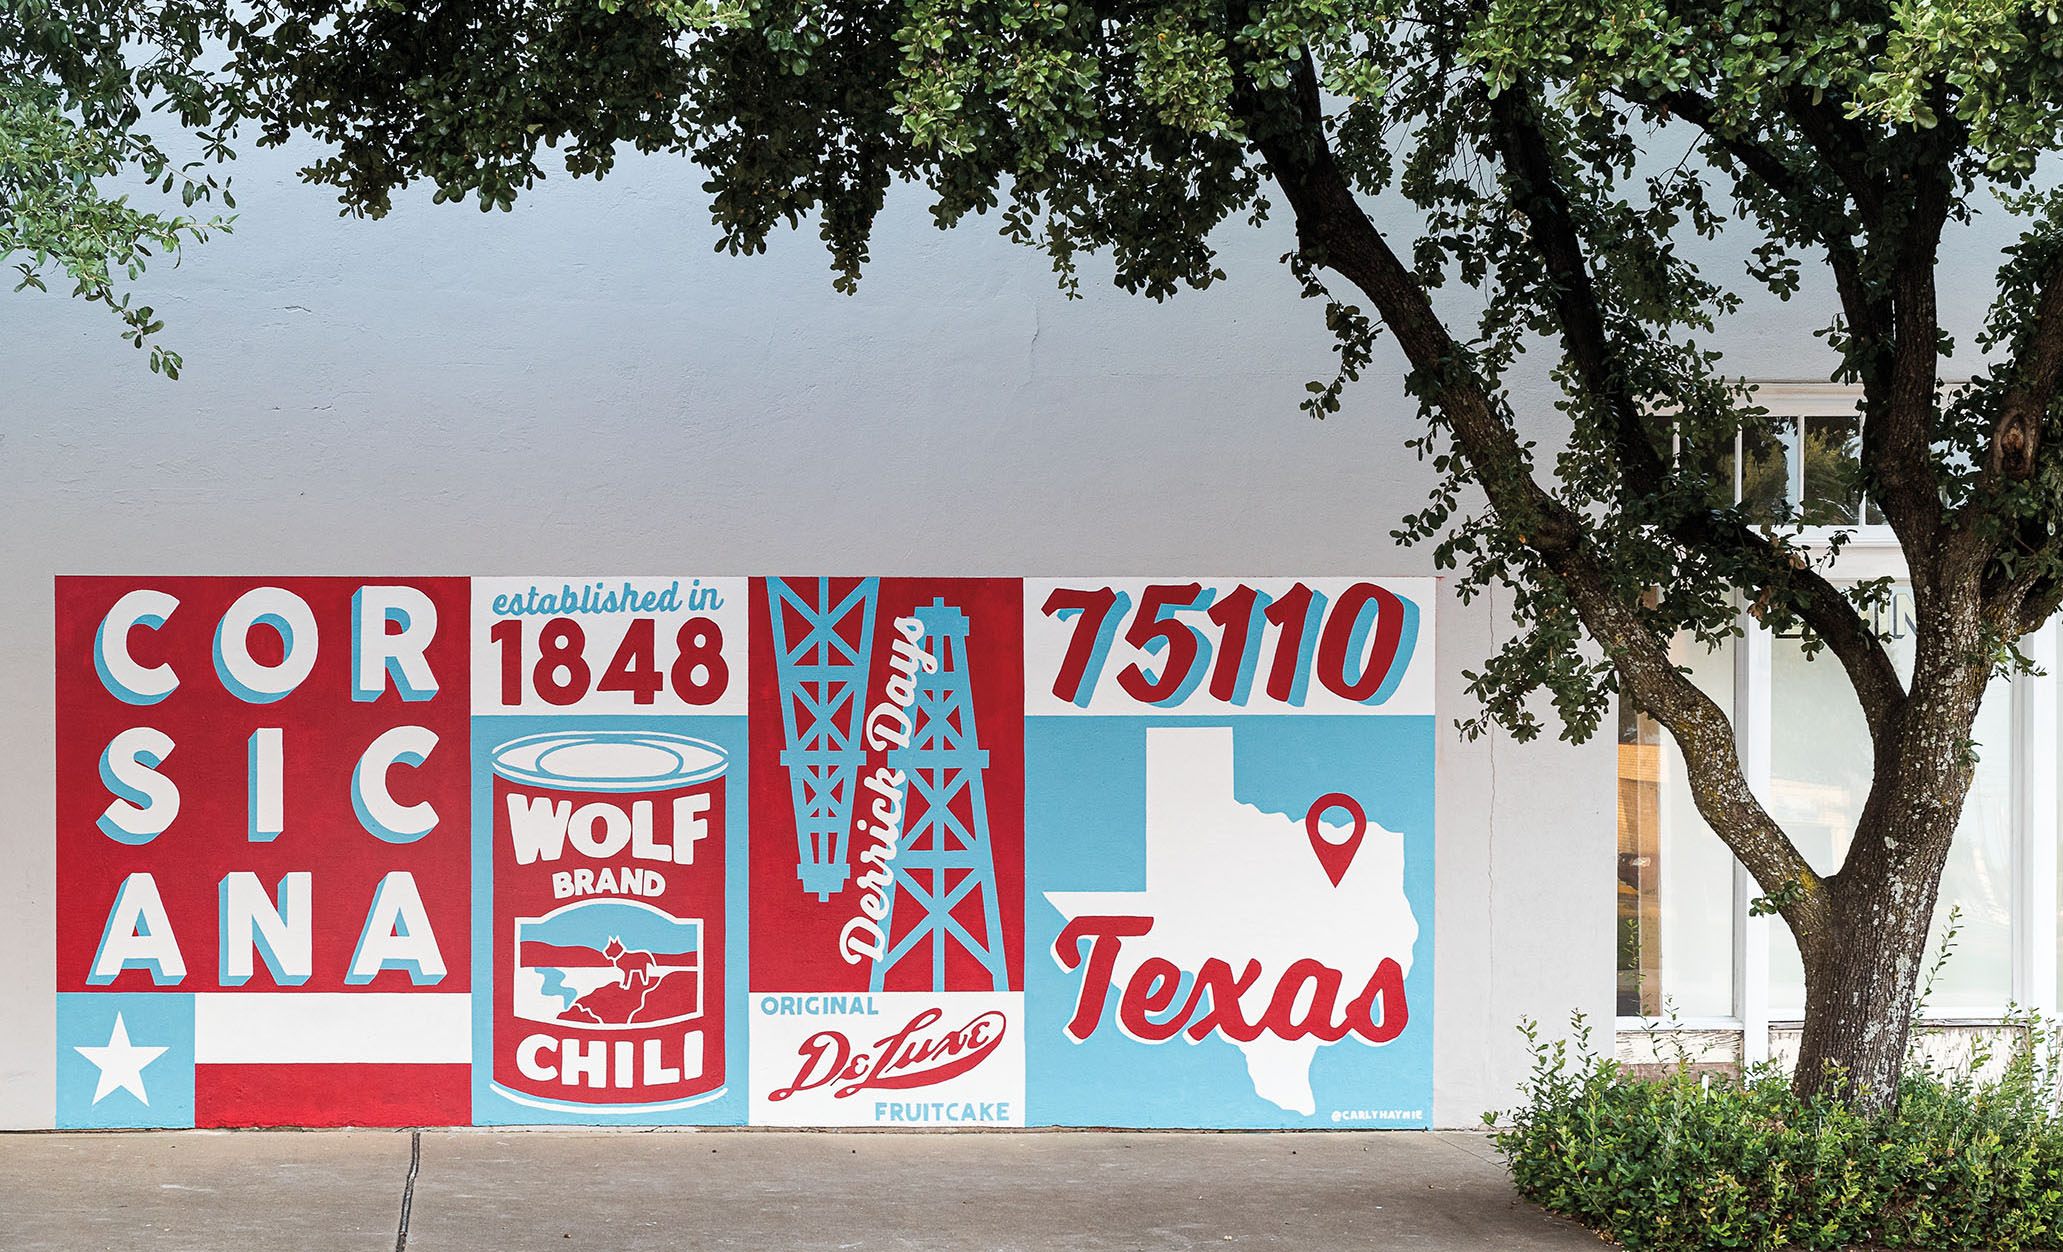 A red, white and blue mural in the town of Corsicana referencing history as birthplace of Wolf Brand Chili. Mobil Oil, and Collin Street Bakery